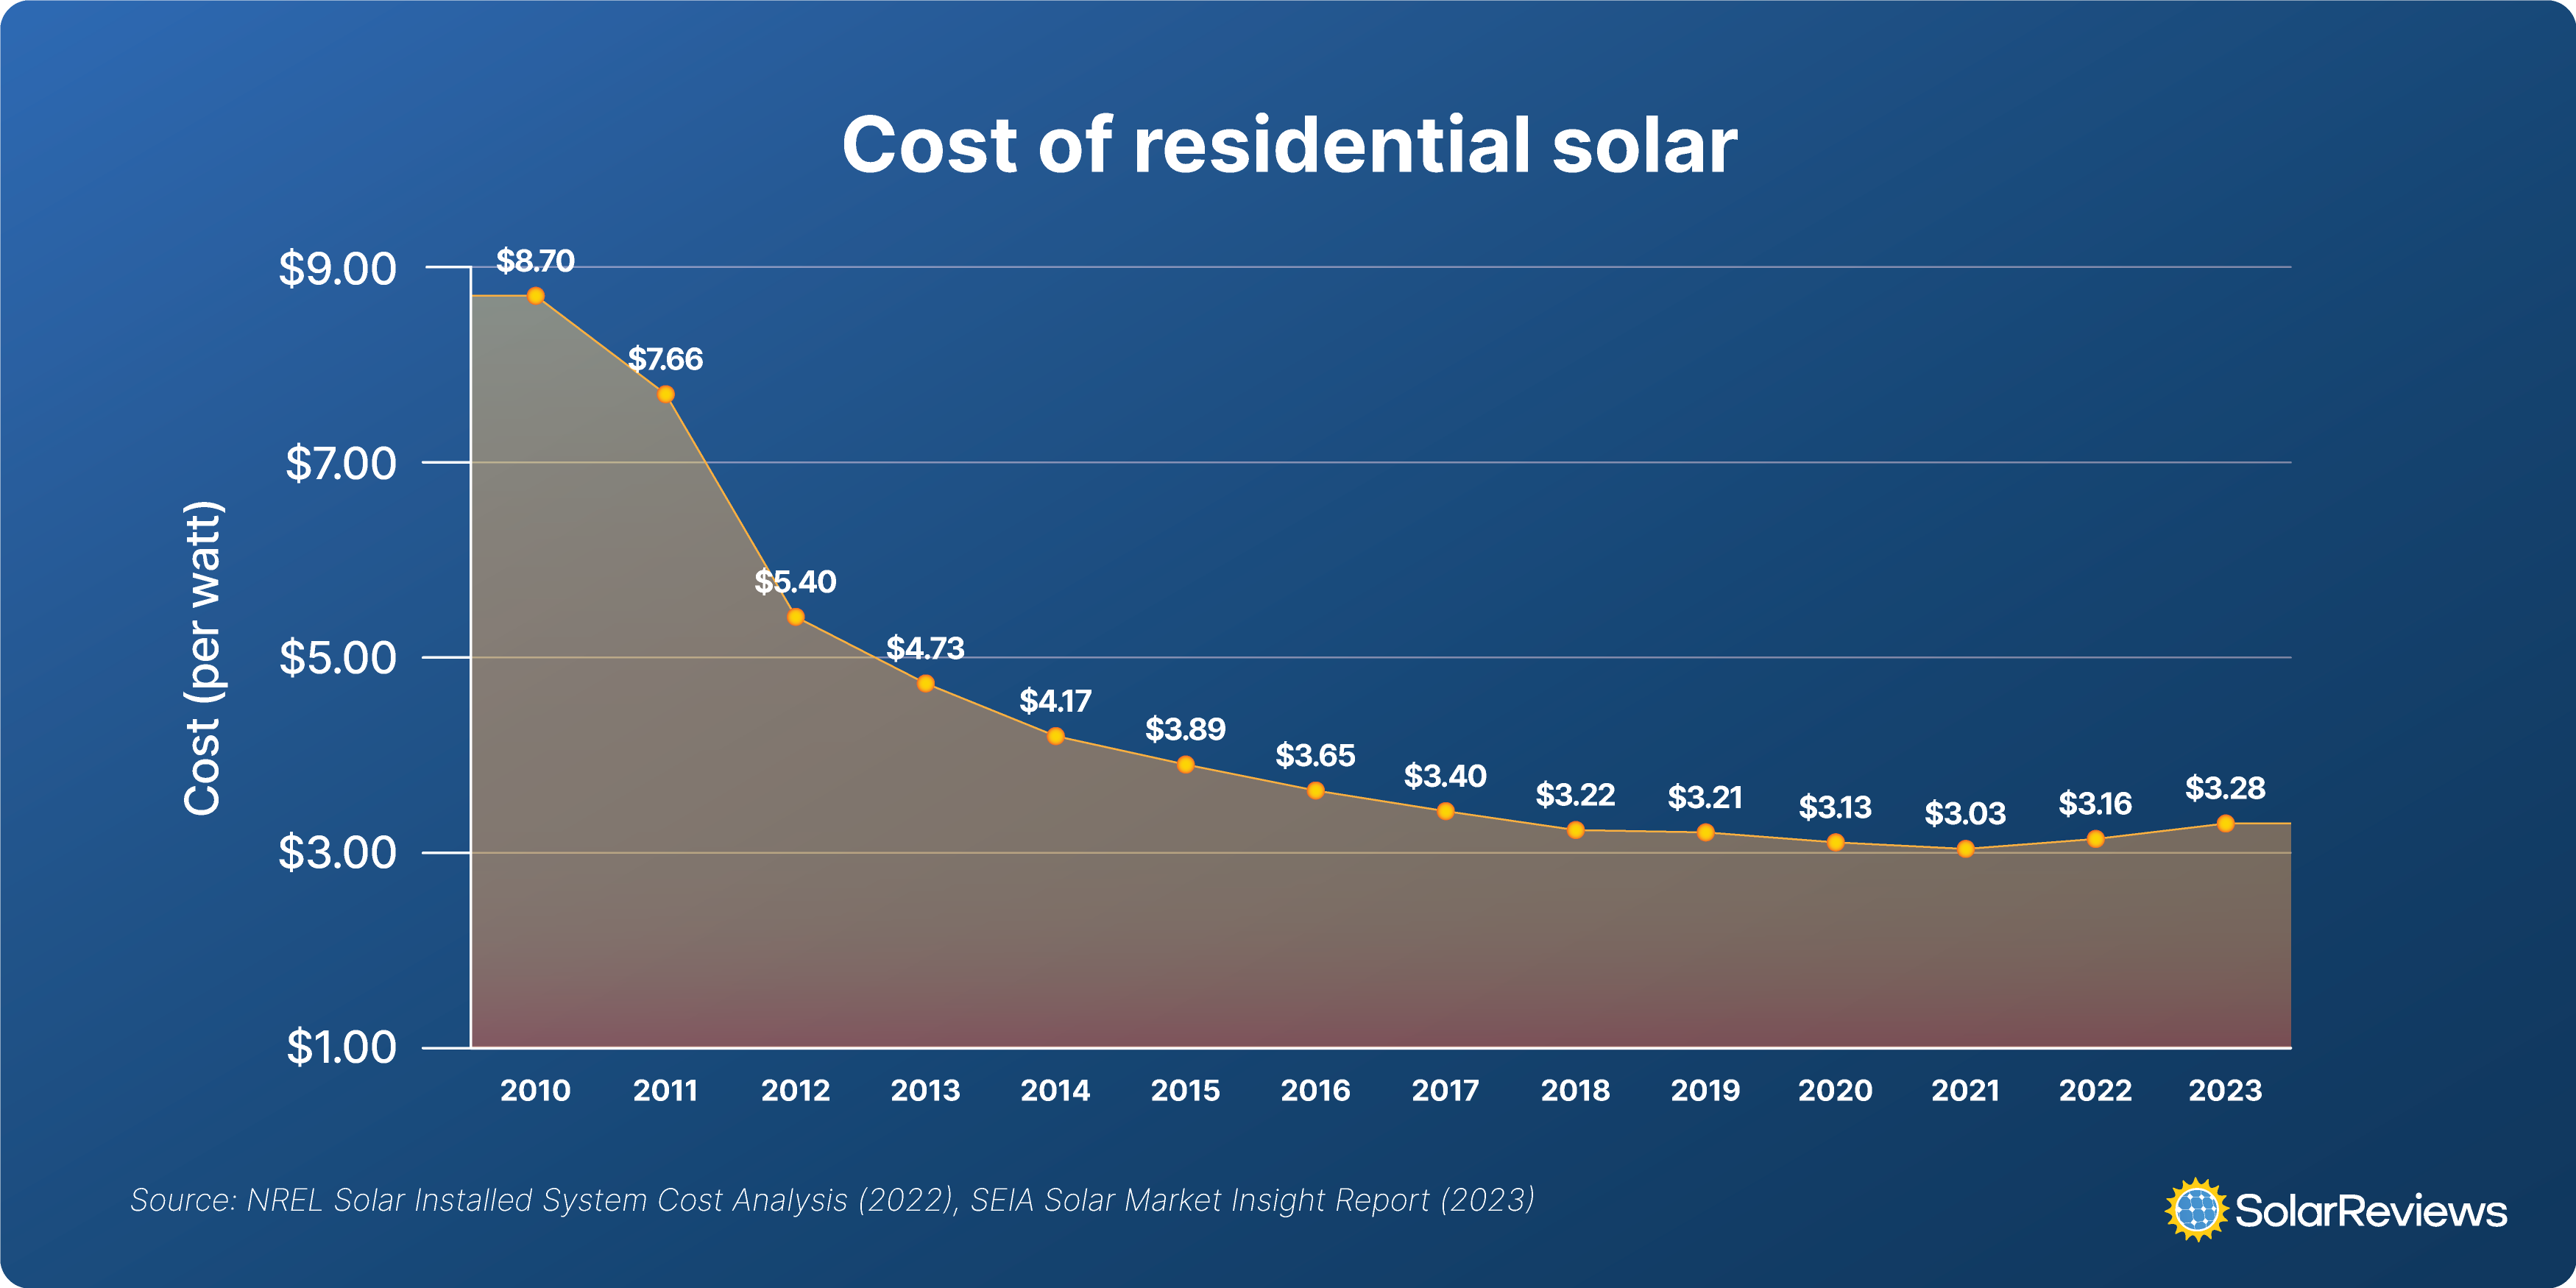 Line graph showing the decline in the cost of residential solar from 2010 to 2023